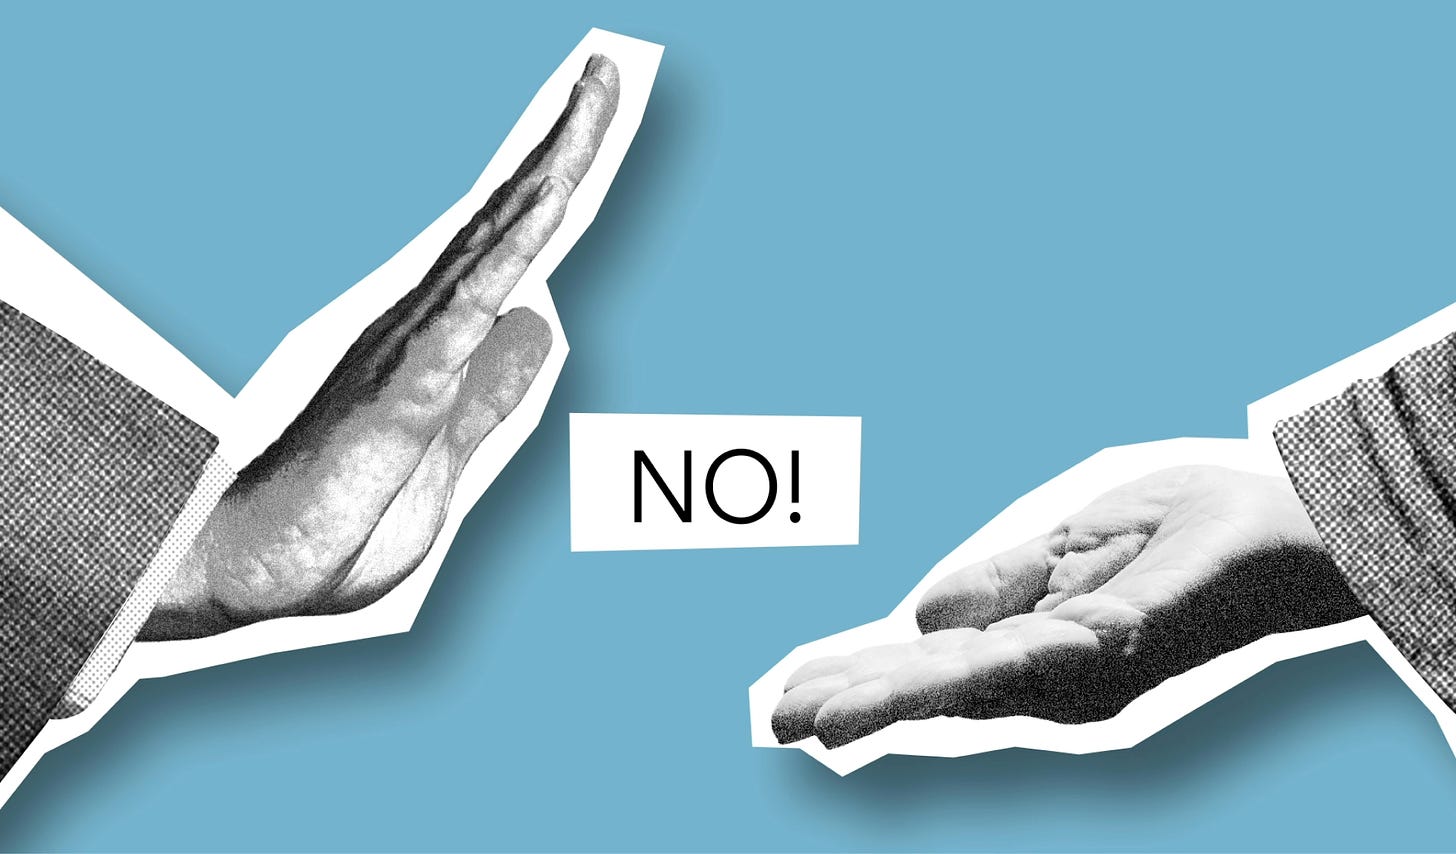 Two cutout images of hands (in black and white) facing each other around the word “no” on a blue background.